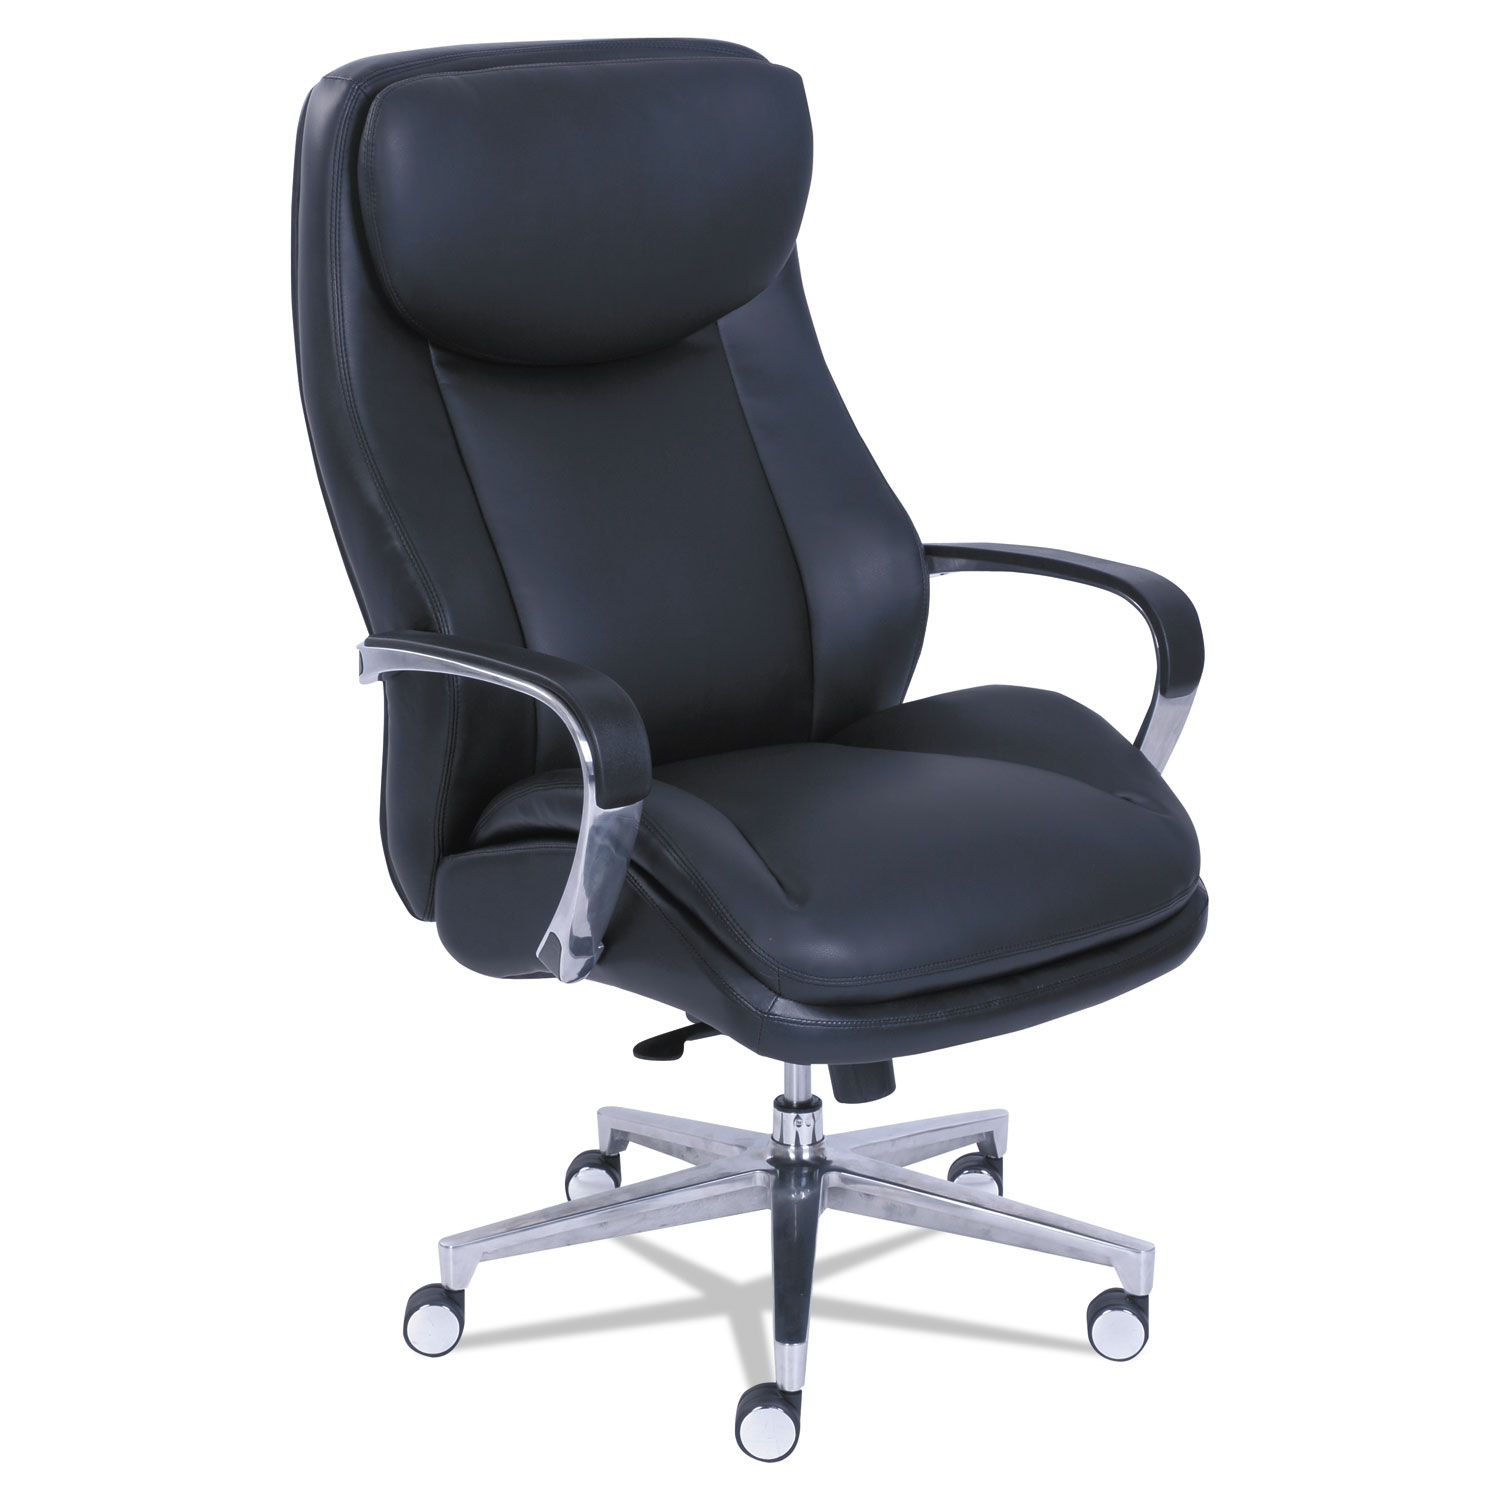  La-Z-Boy 48968 Commercial 2000 Big and Tall Executive Chair, Supports up to 400 lbs., Black Seat/Black Back, Silver Base (LZB48968) 